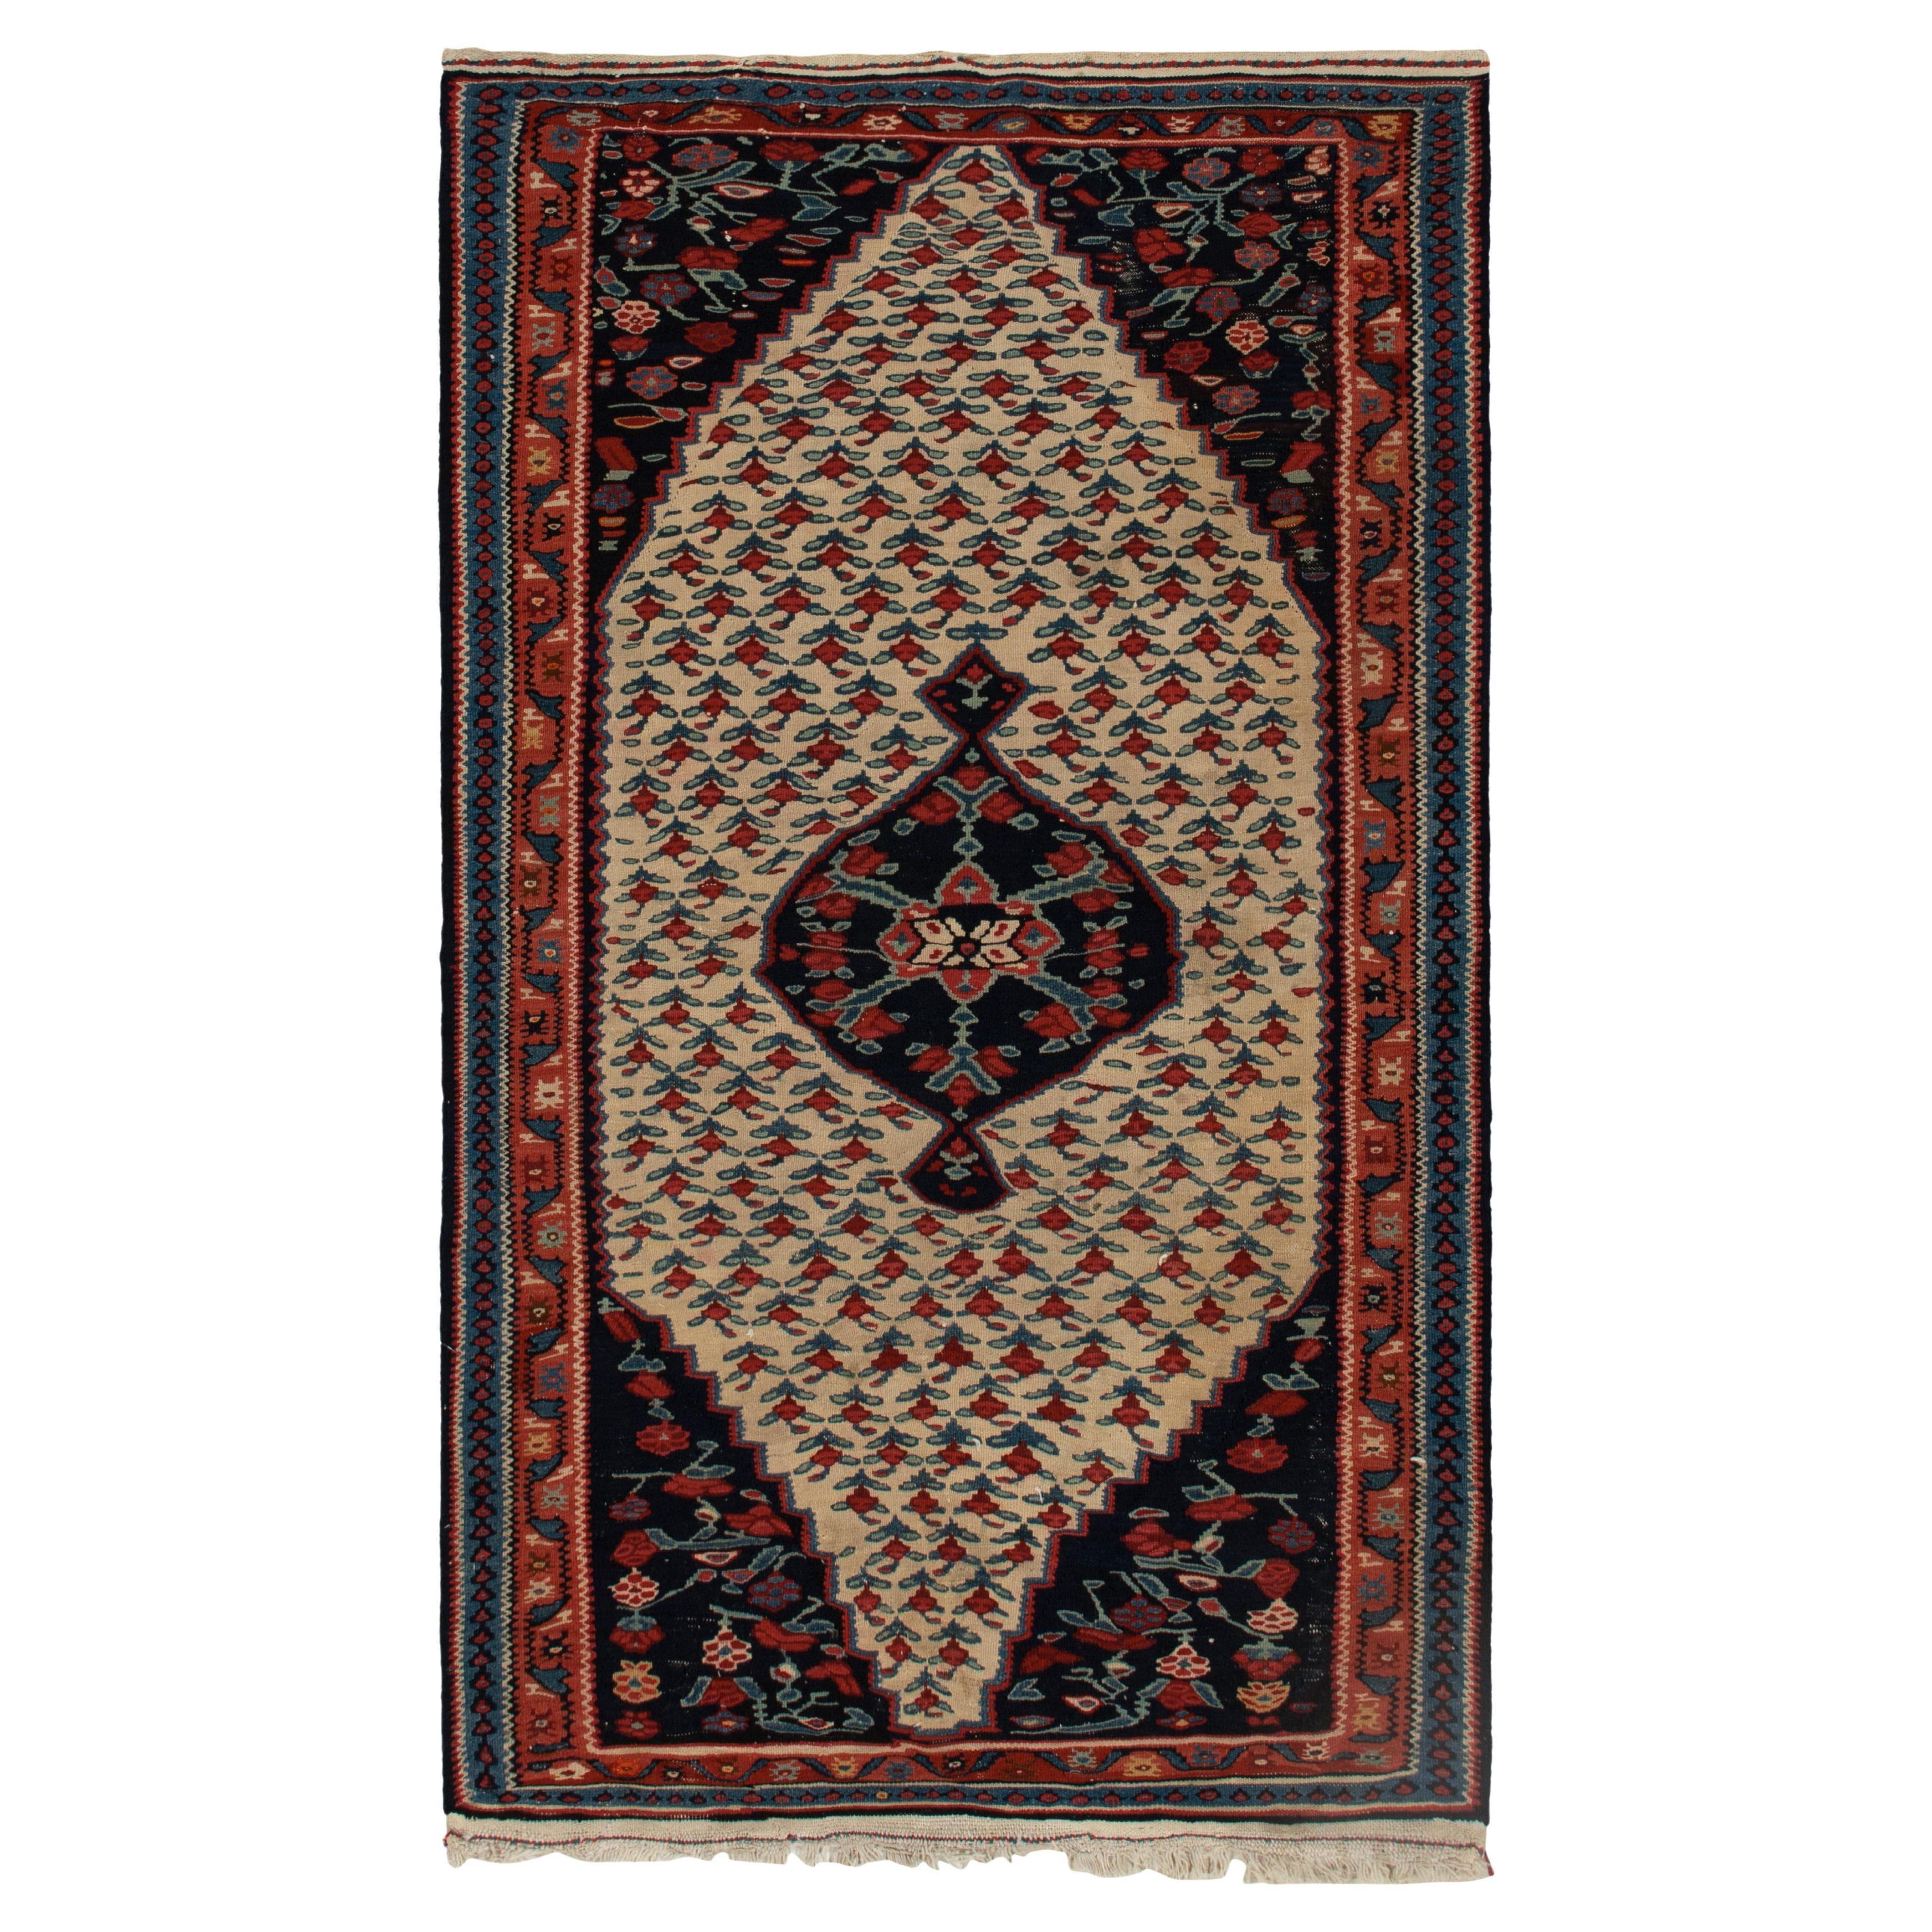 Antique Persian Senneh Kilim in Beige with Red Floral Patterns by Rug & Kilim